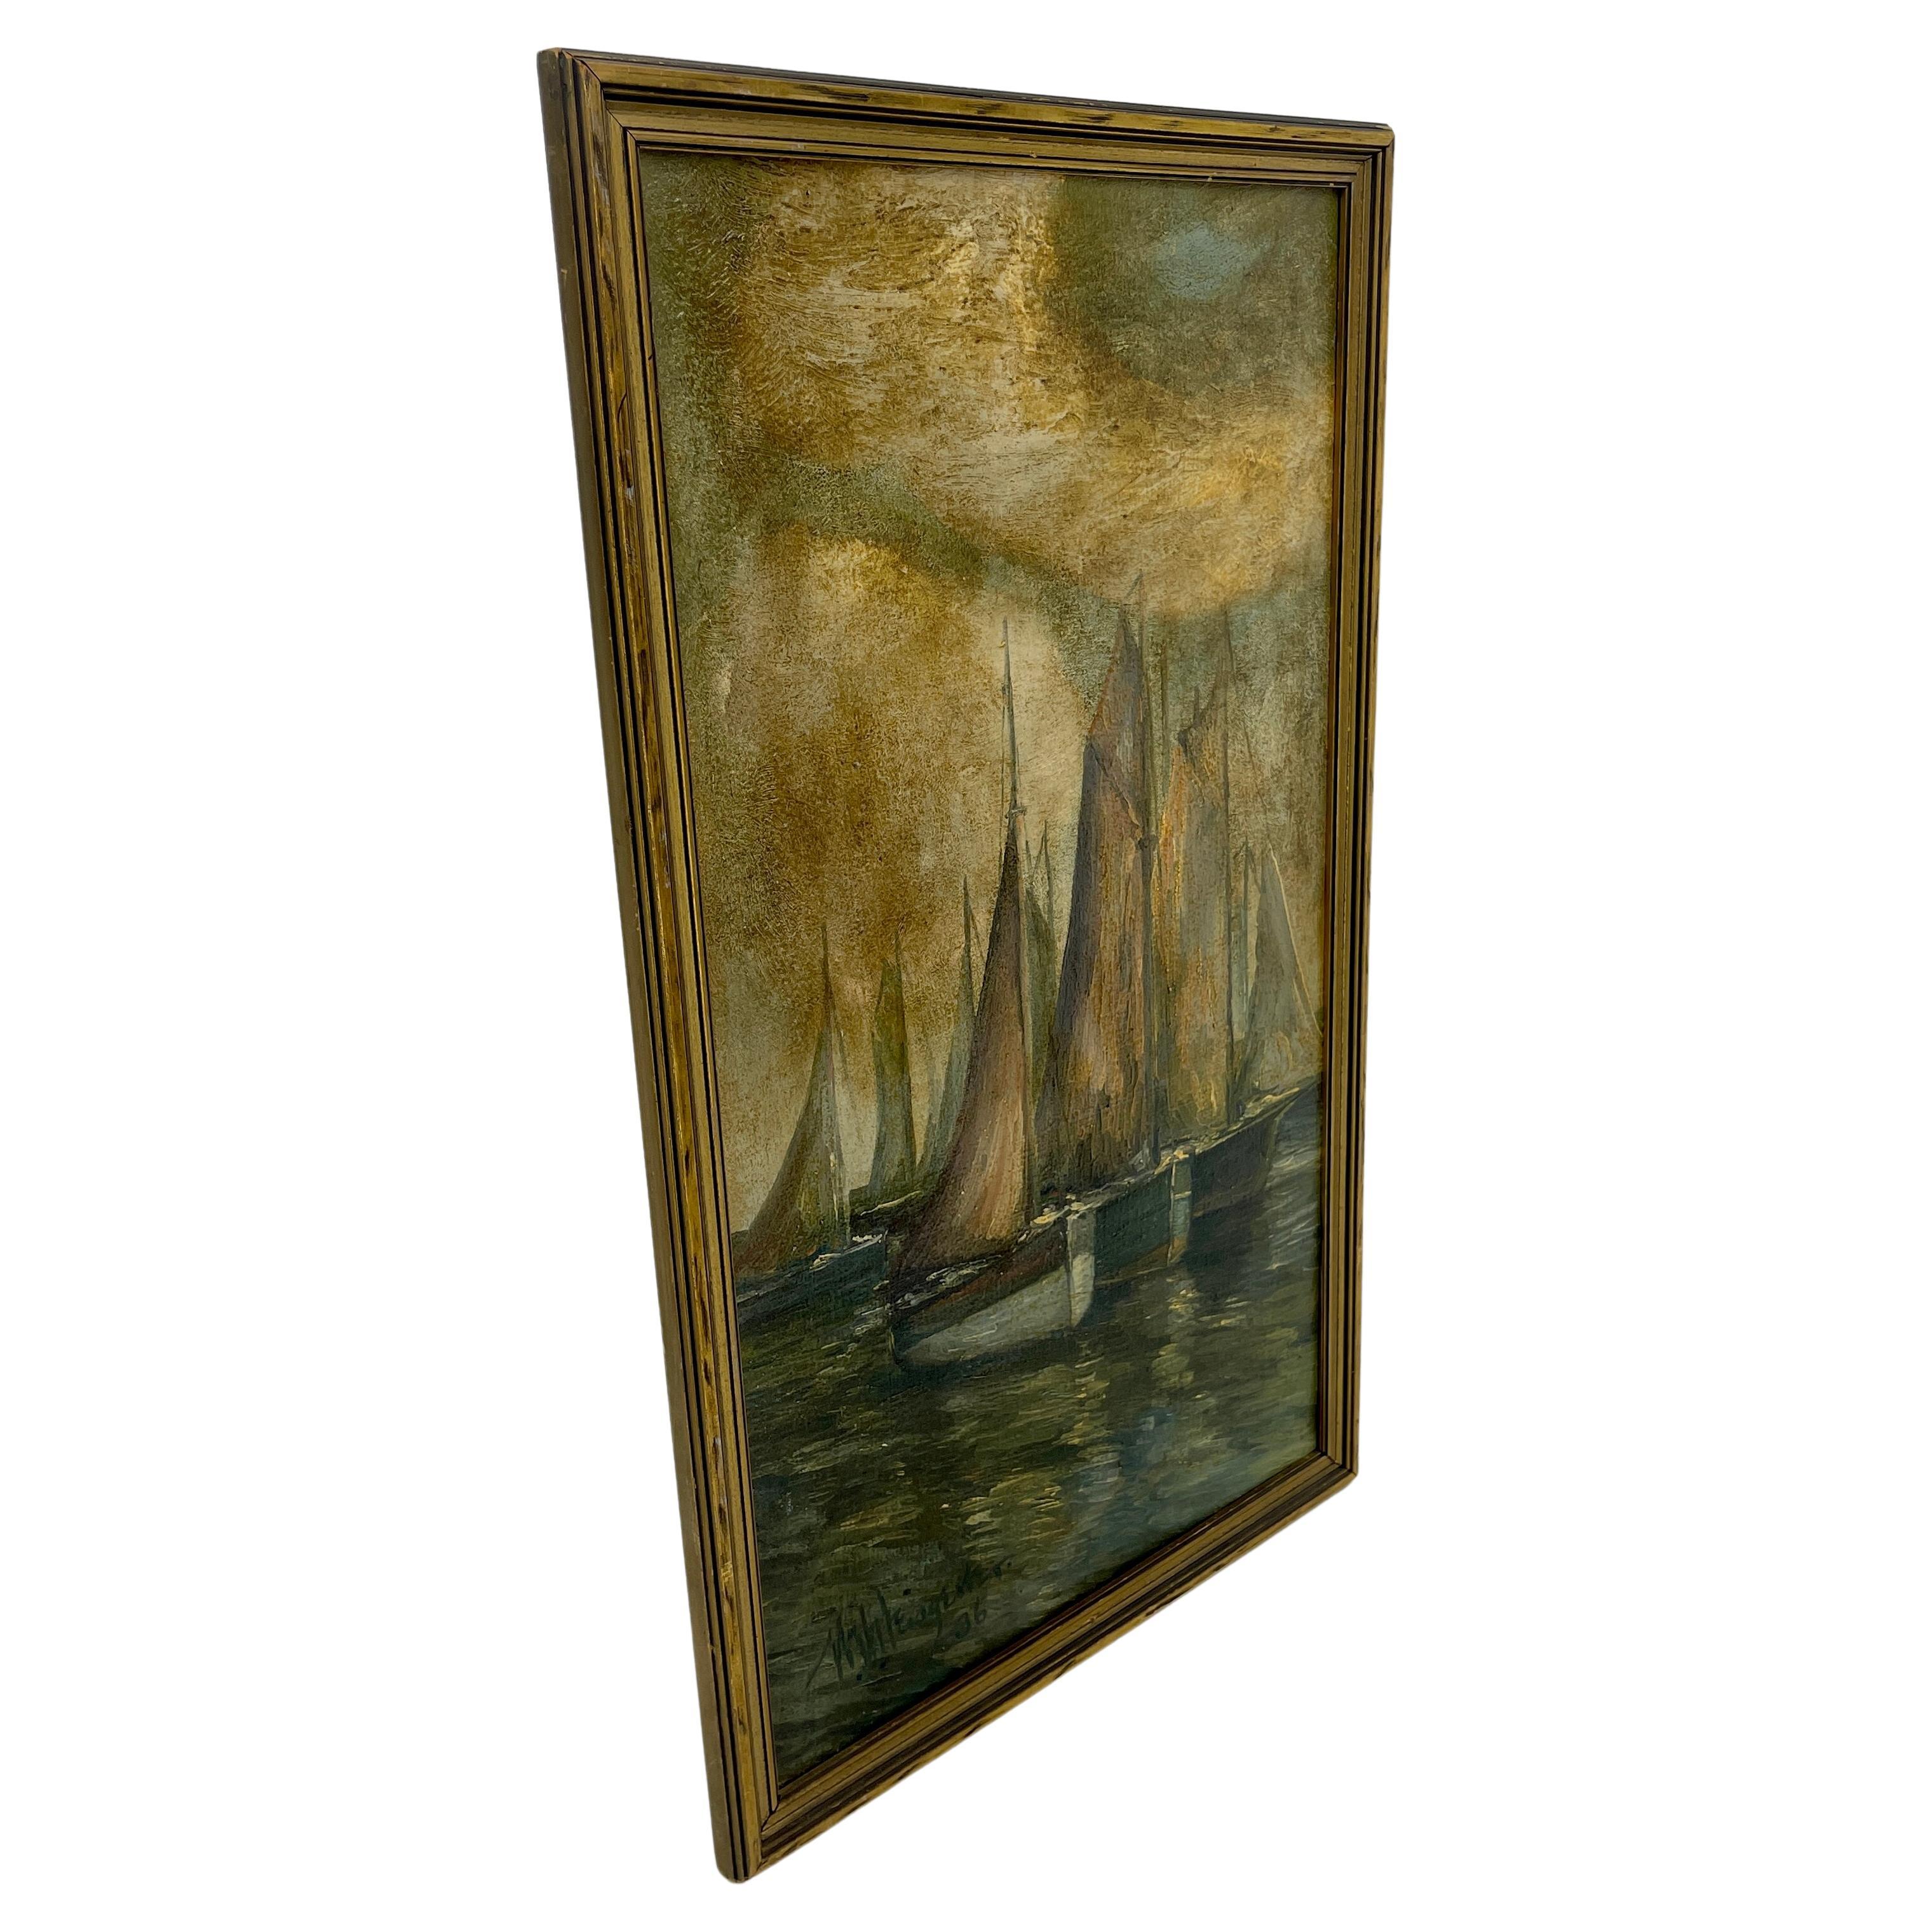 Hand-Painted Mid-Century Sailboats on Water Signed Oil Painting, Vertical Framed Composition